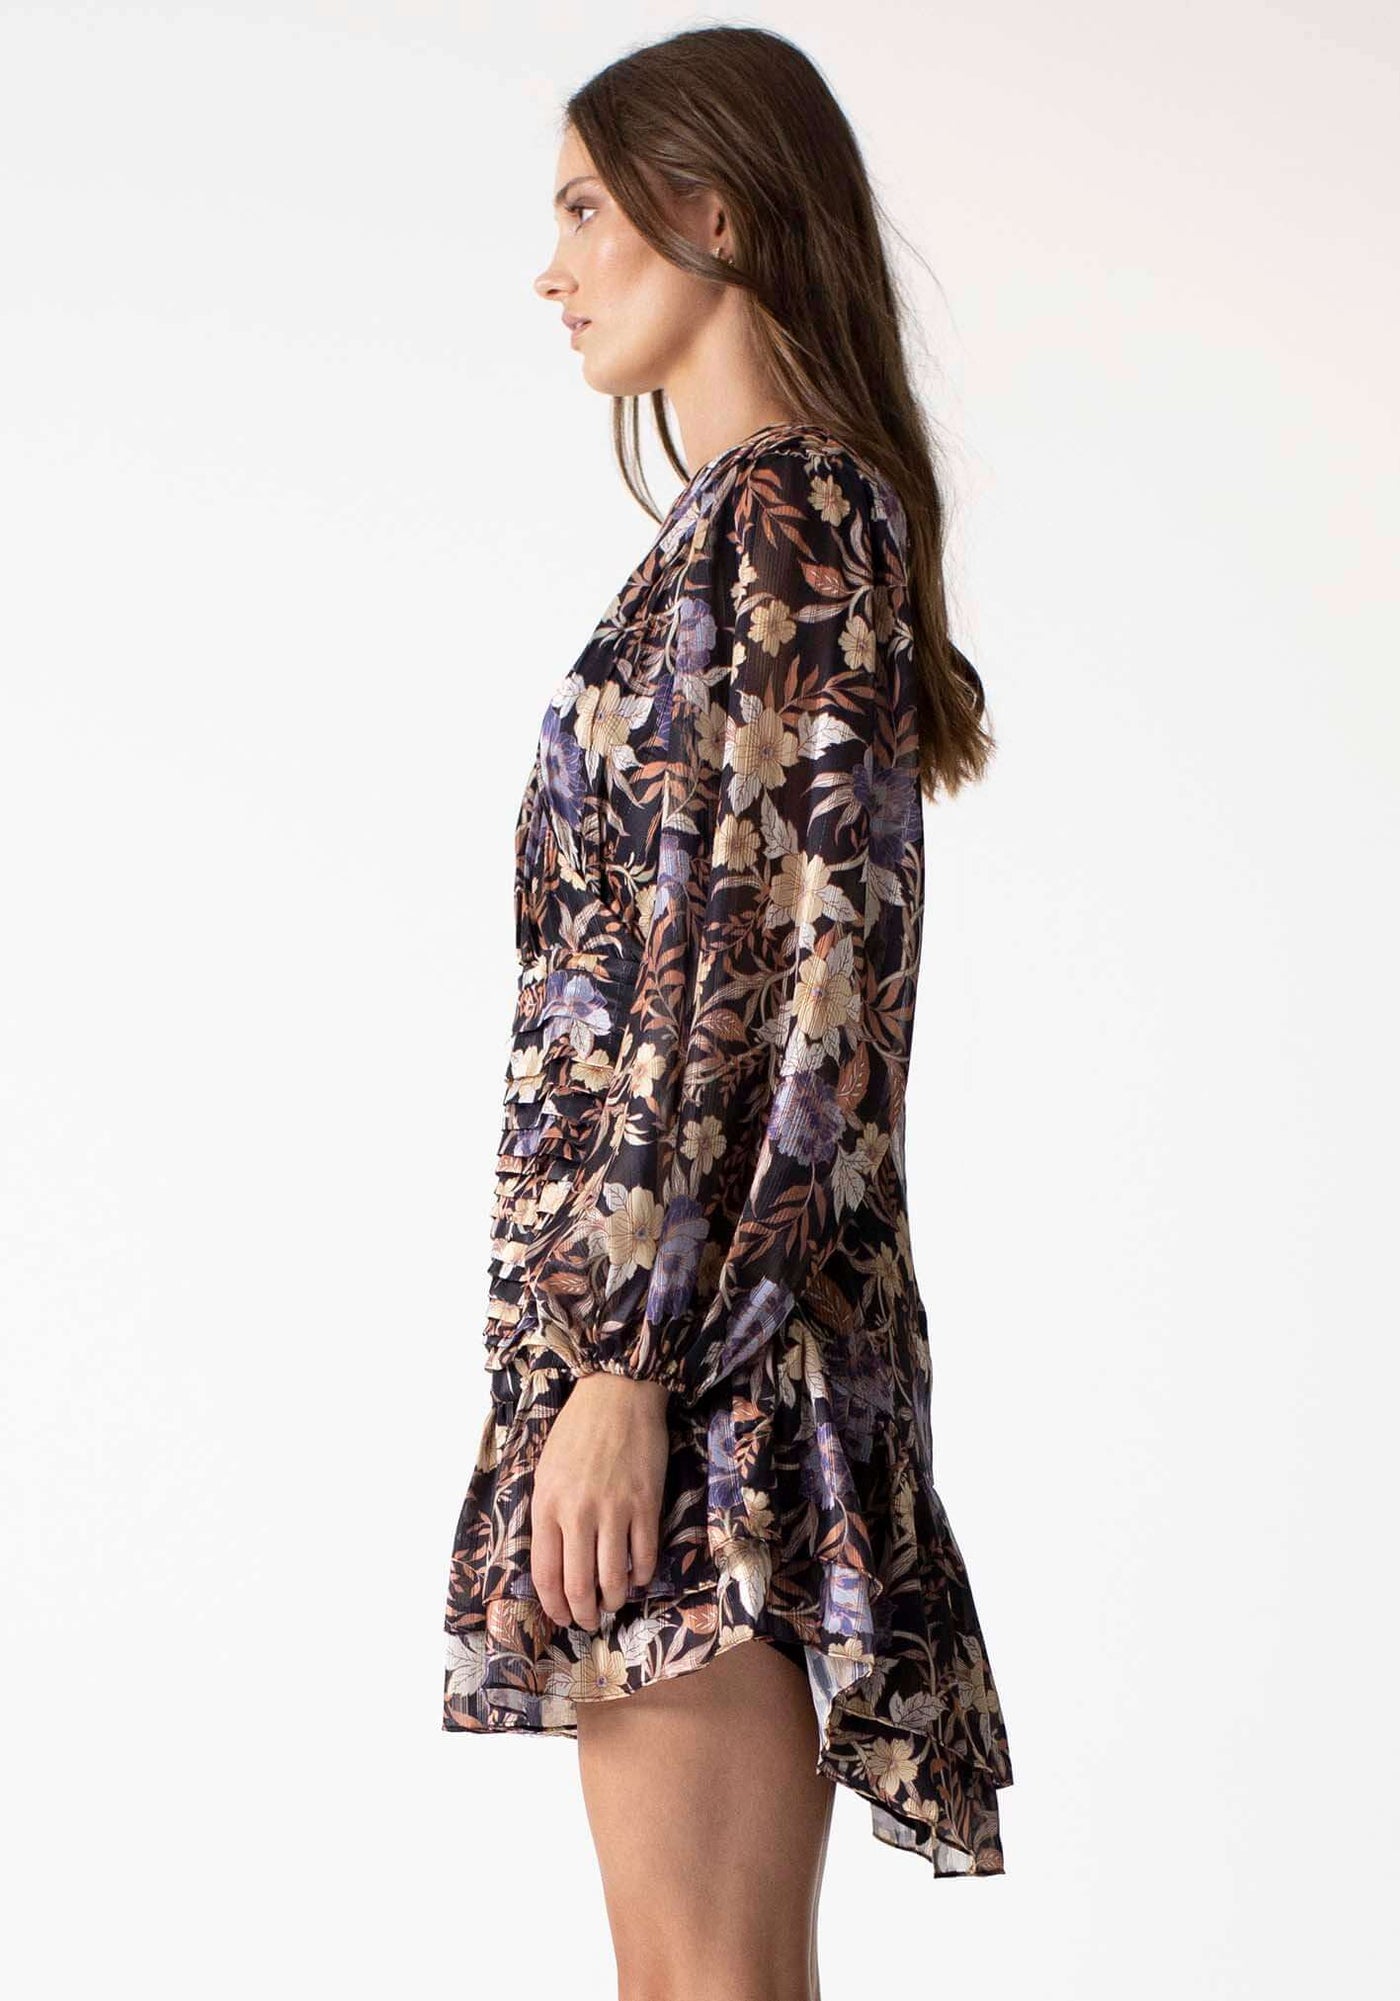 Another Realm Floral Mini Dress | Floral Dresses Australia by Three of Something